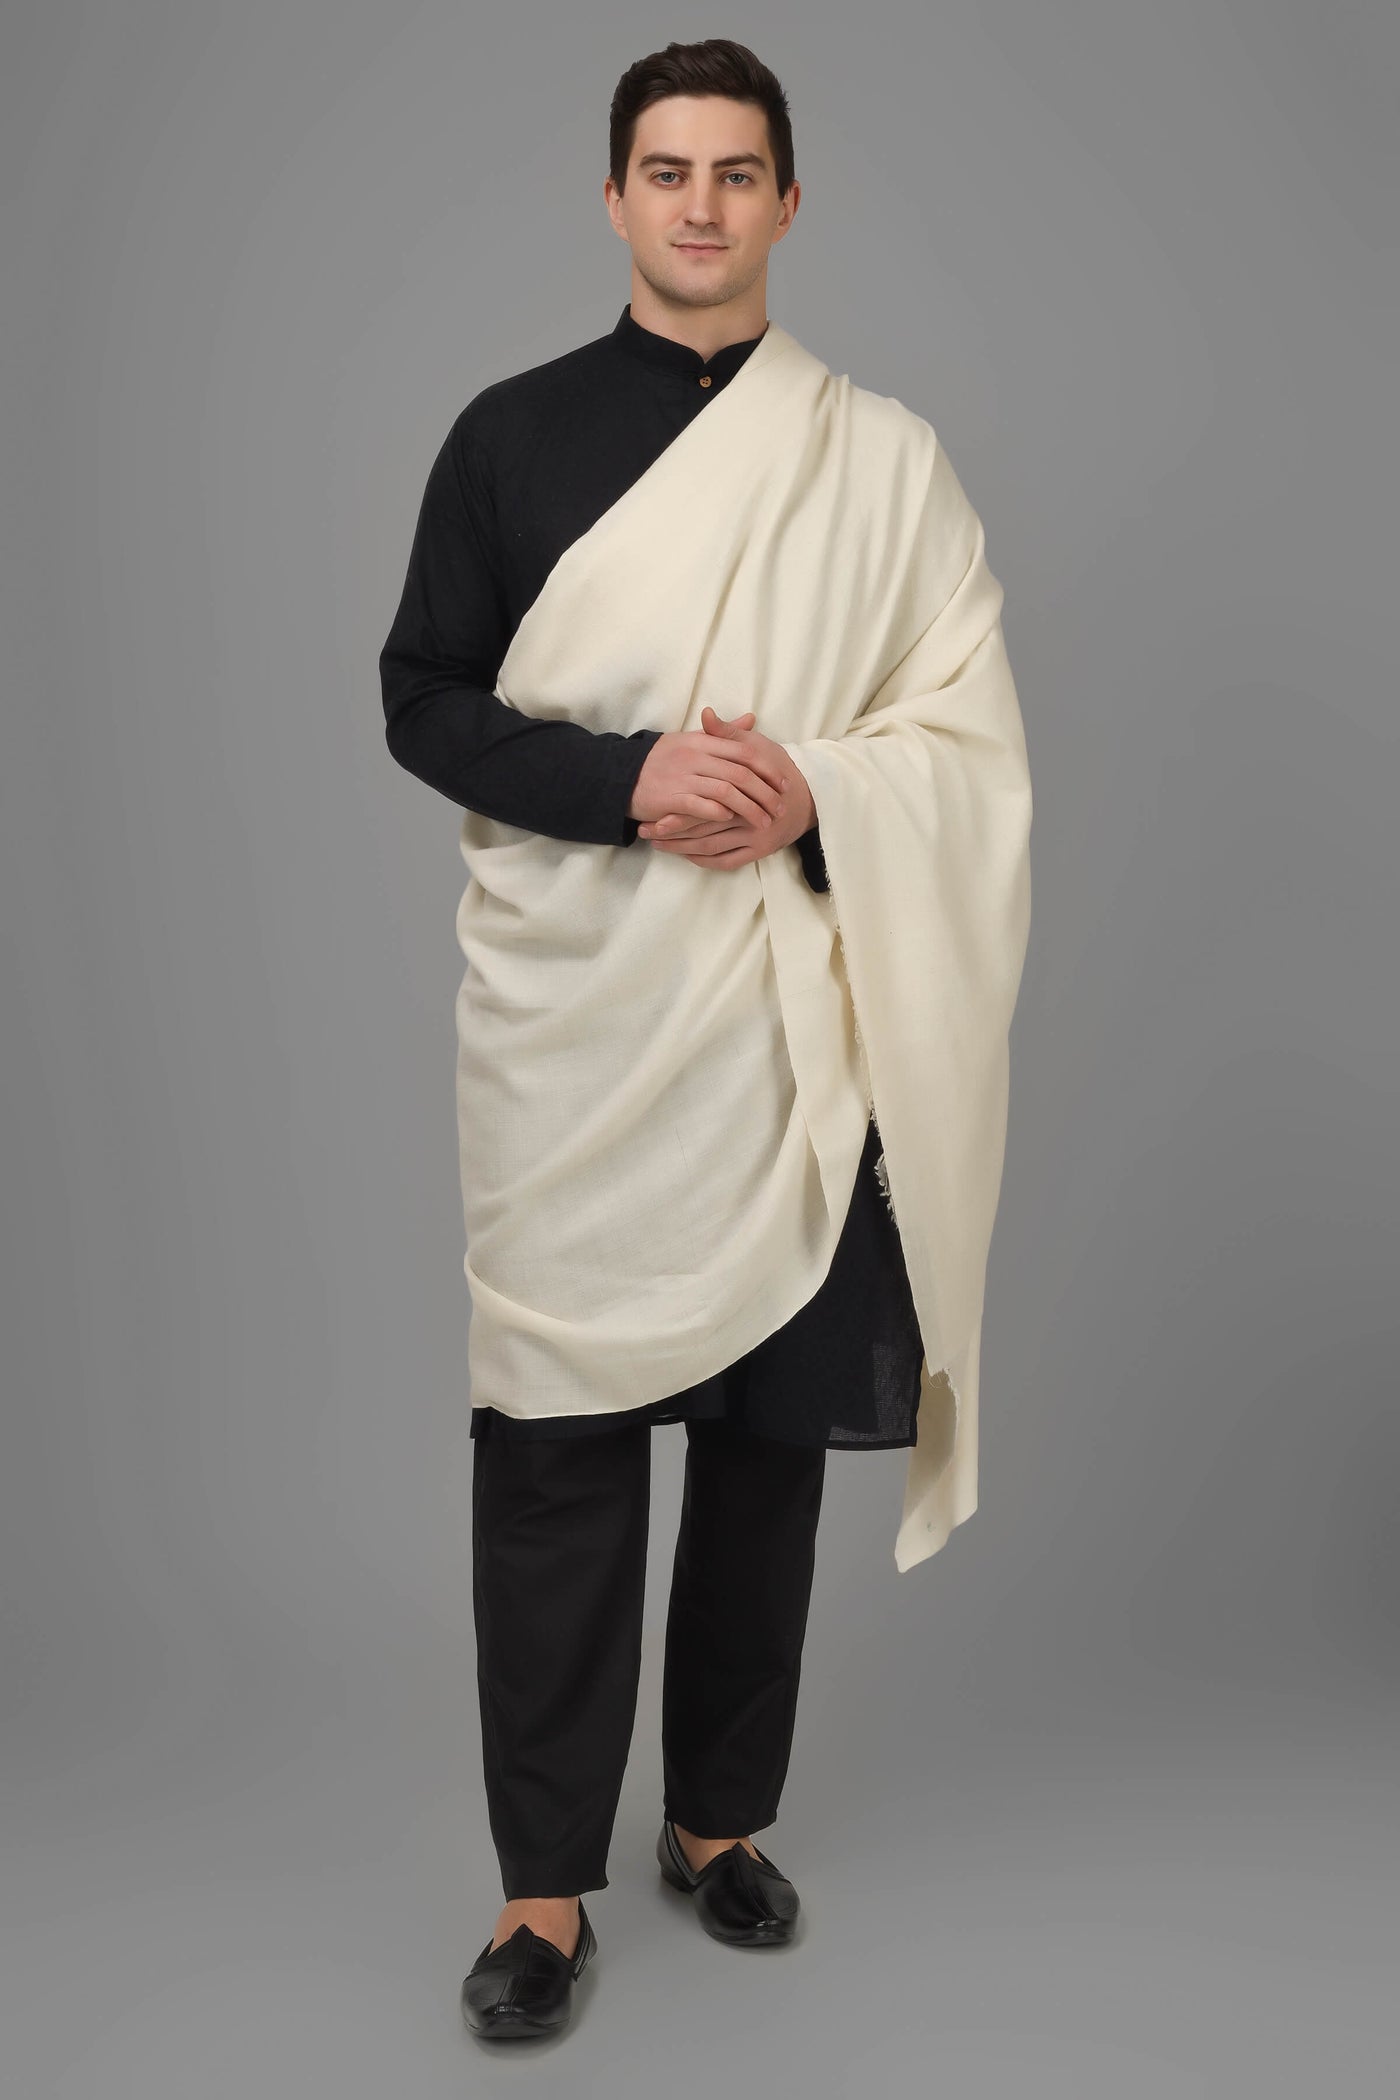 This Pashmina white mens shawl.  It is crafted by the most talented Kashmiri Artisans with extreme skill and expertise. The skills represent the true craftsmanship of these Kashmiri Artisans. 